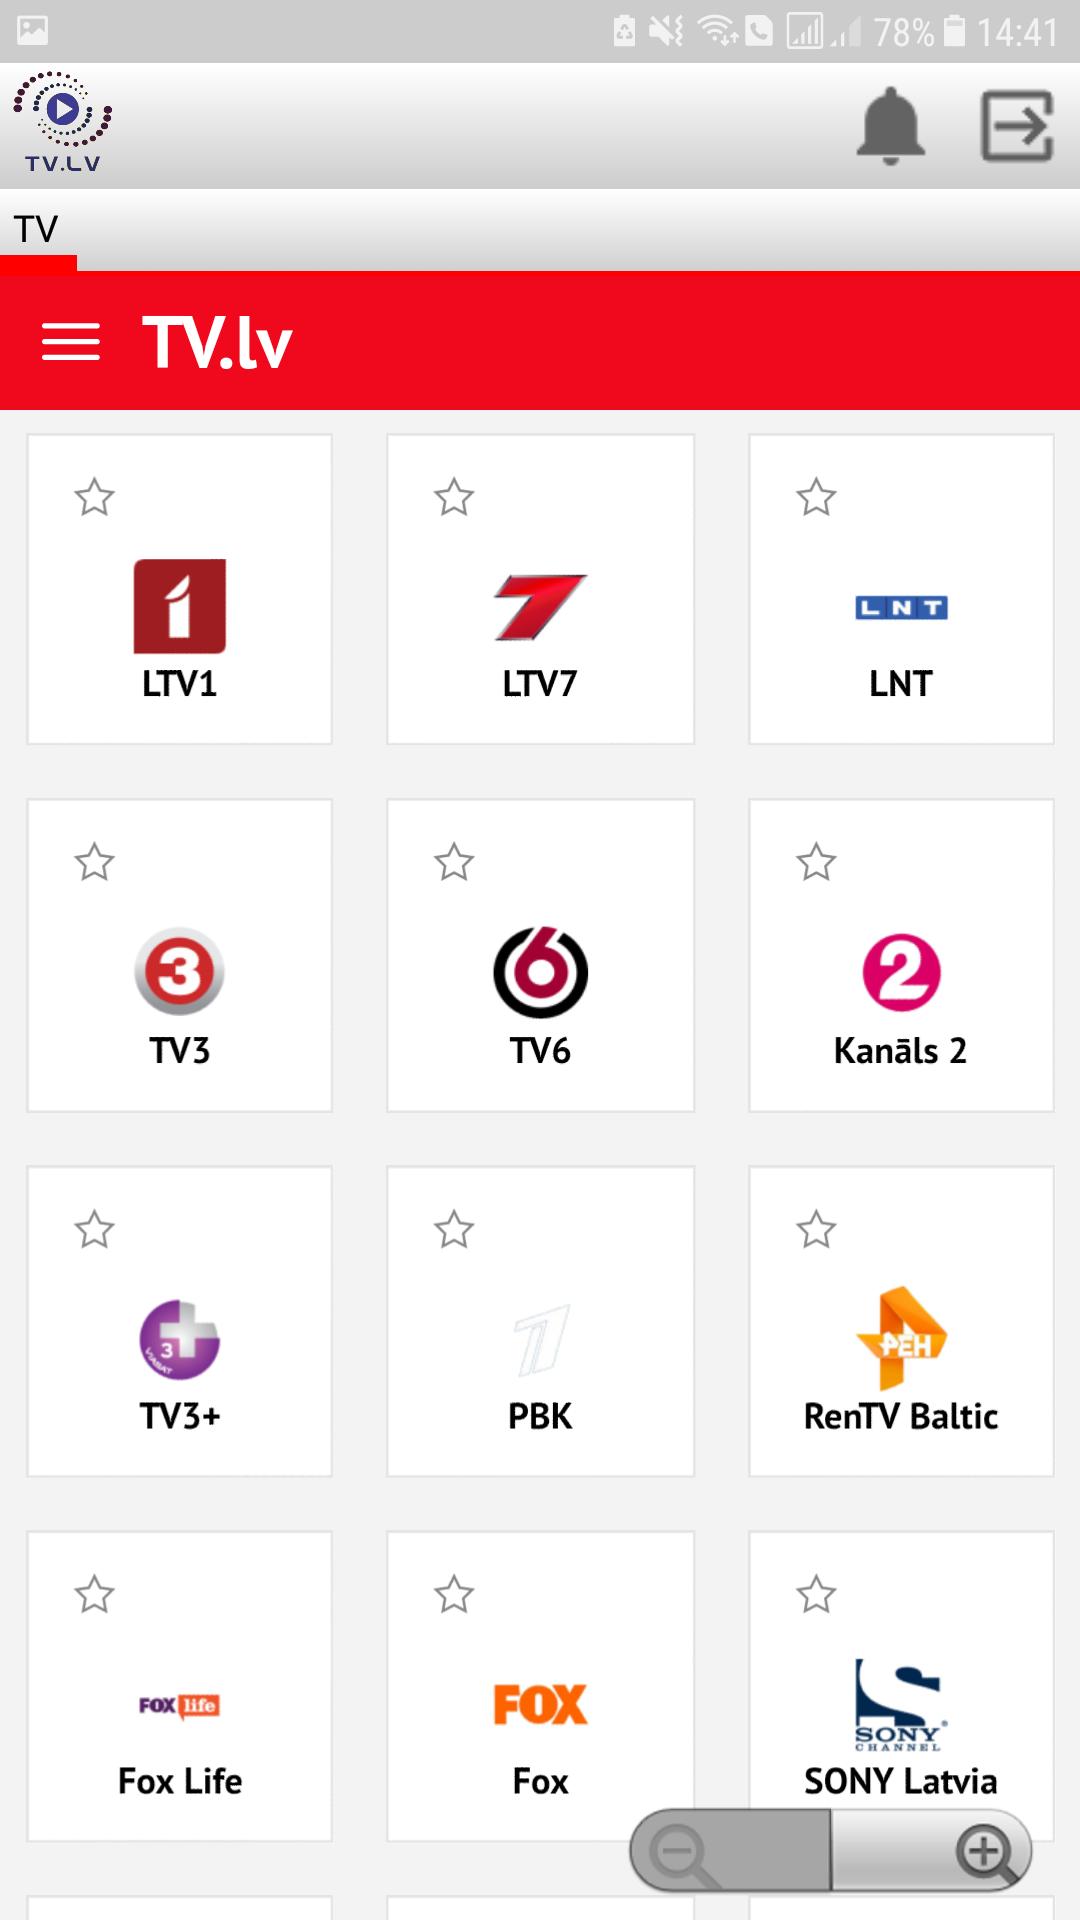 TV.LV for Android - APK Download